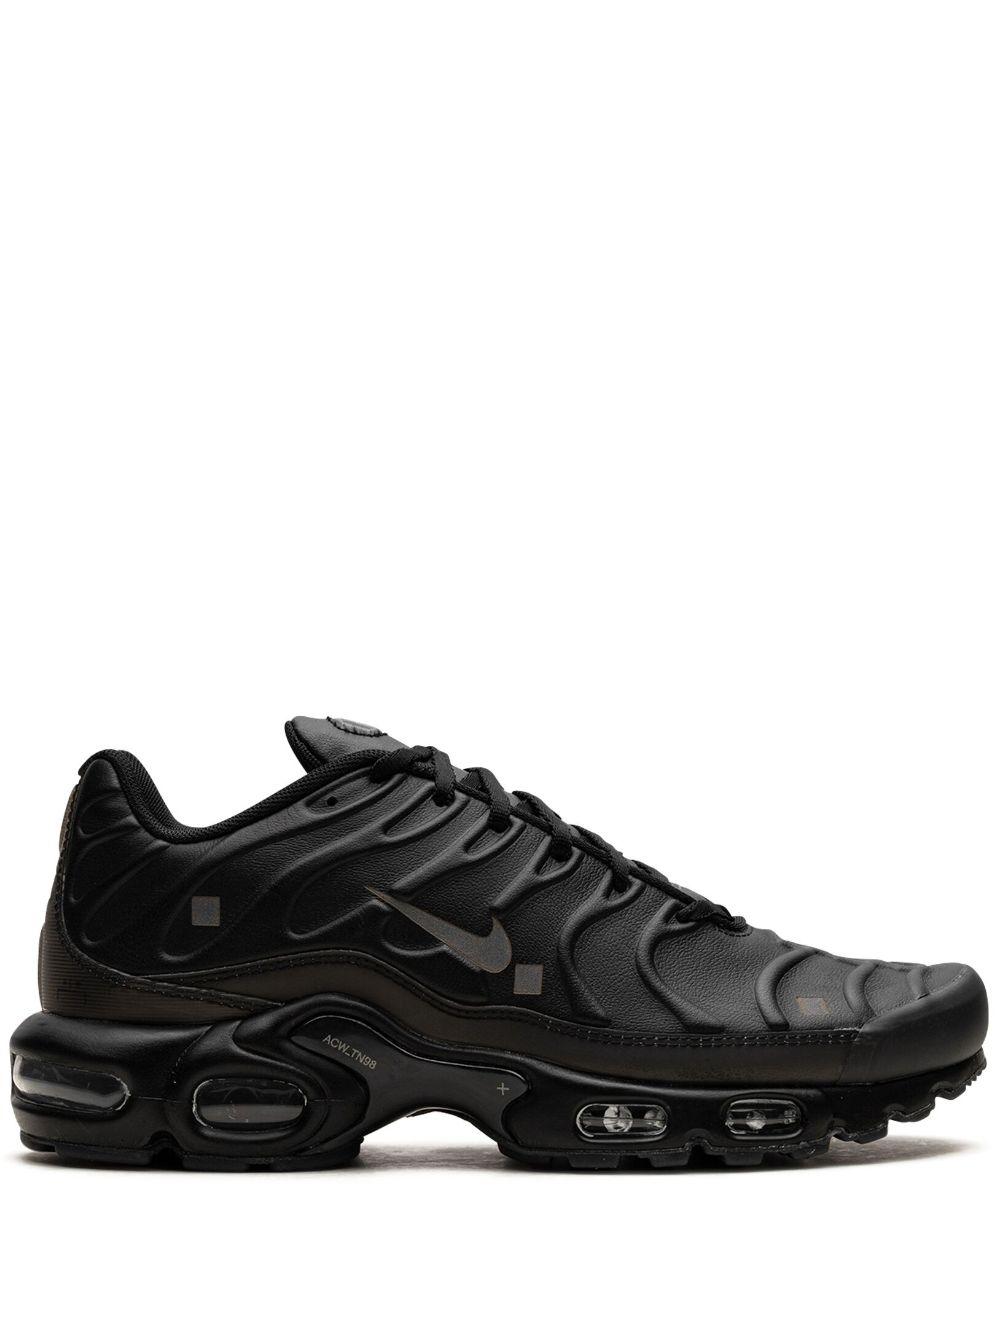 Nike X A-cold-wall* Air Max Plus Sneakers in Black | Lyst